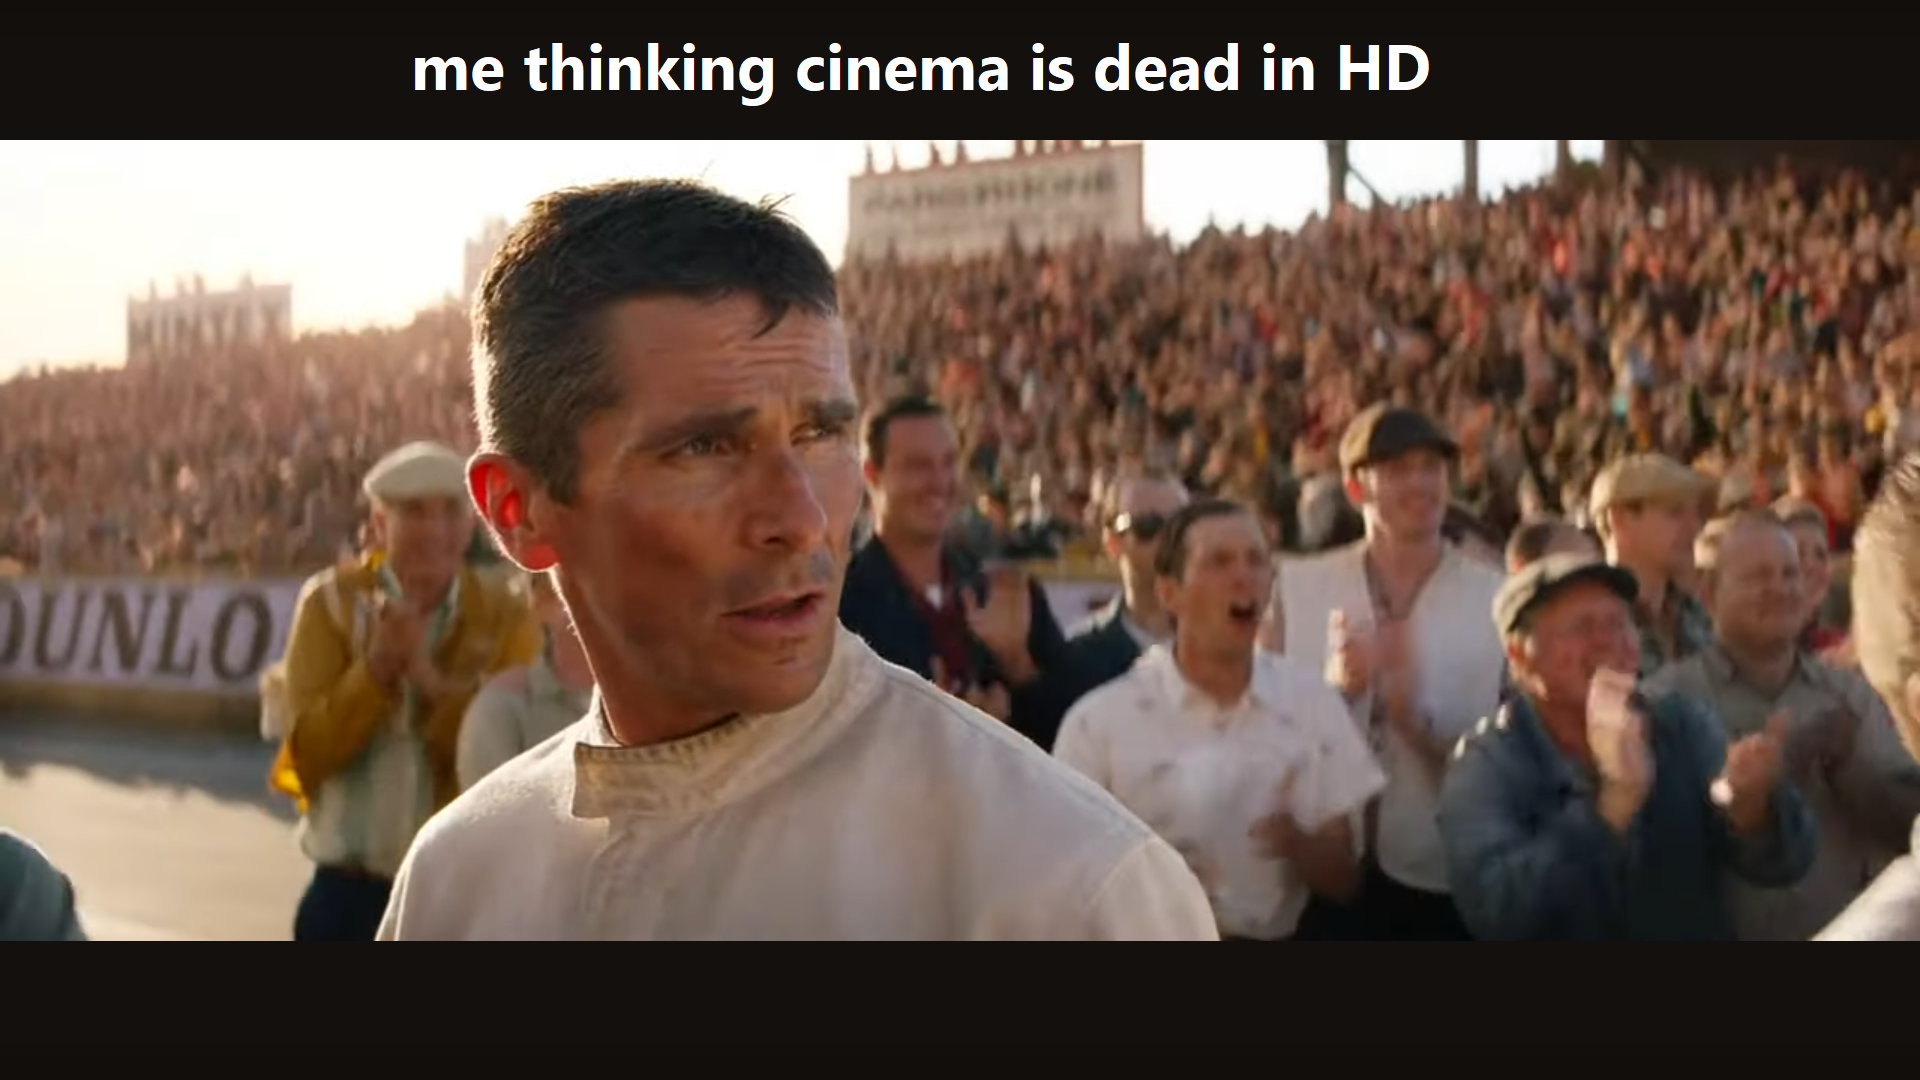 me-thinking-cinema-is-dead-HD.png